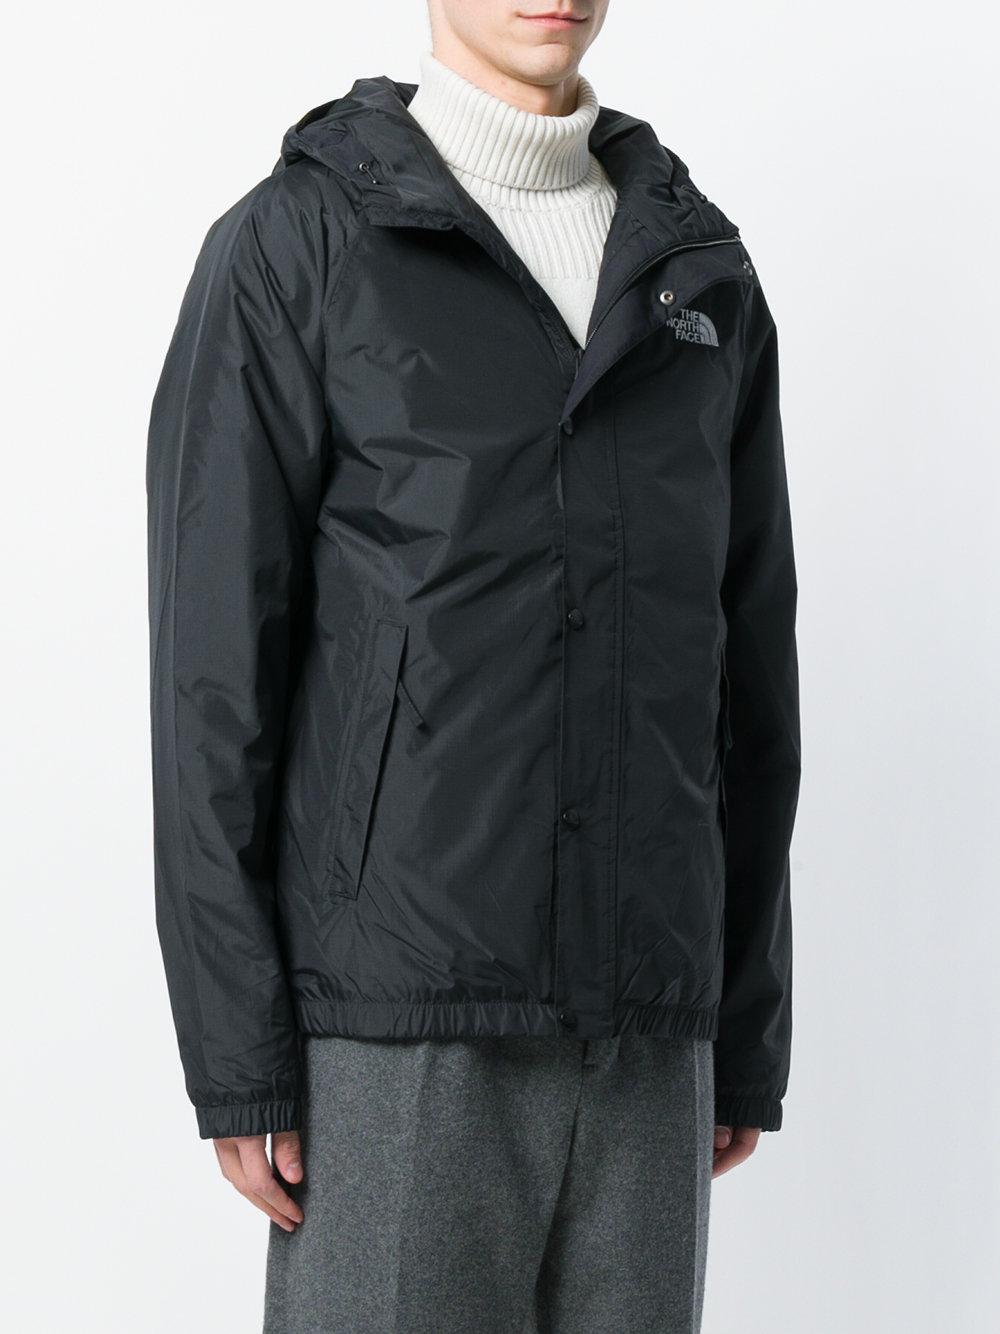 The North Face Synthetic Berk Jacket in Black for Men - Lyst